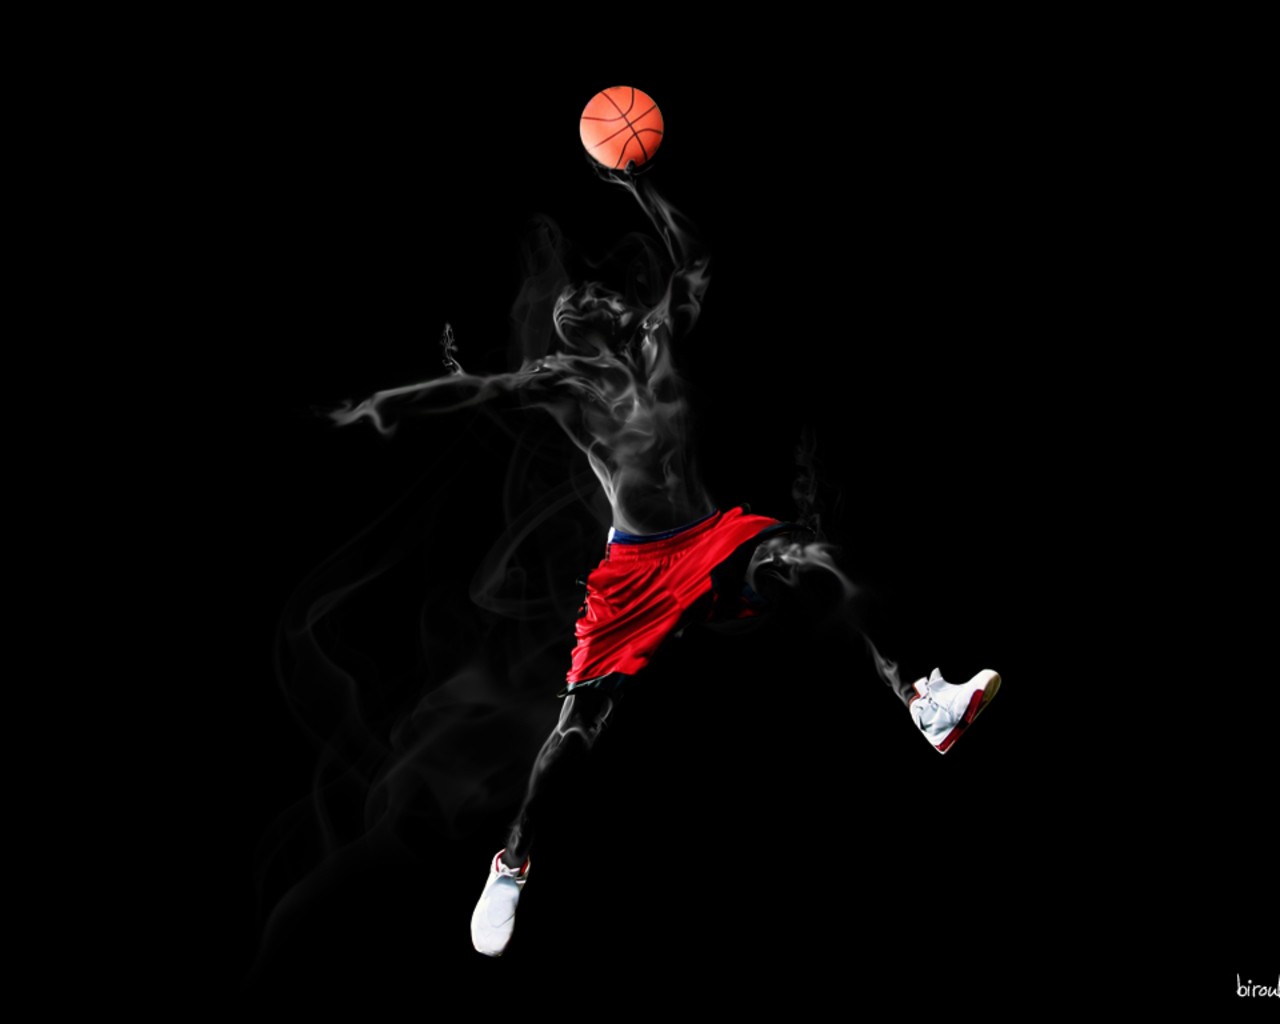 HQ RES Wallpapers of Jordan download free on